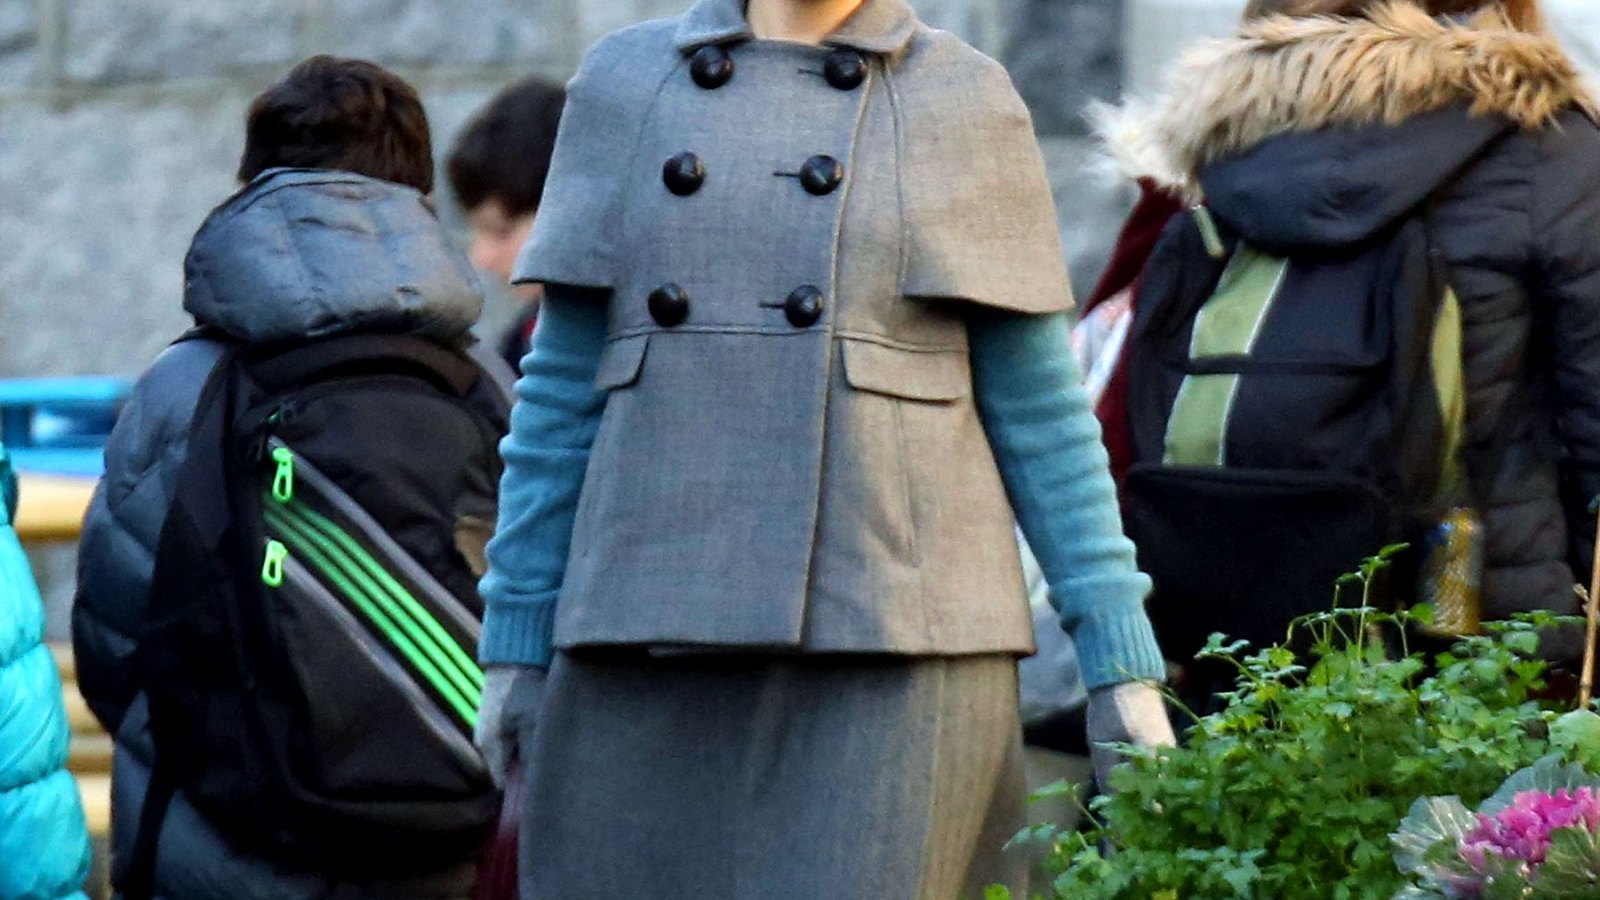 Ginnifer Goodwin on the set of Once Upon a Time in Vancouver Nov 13